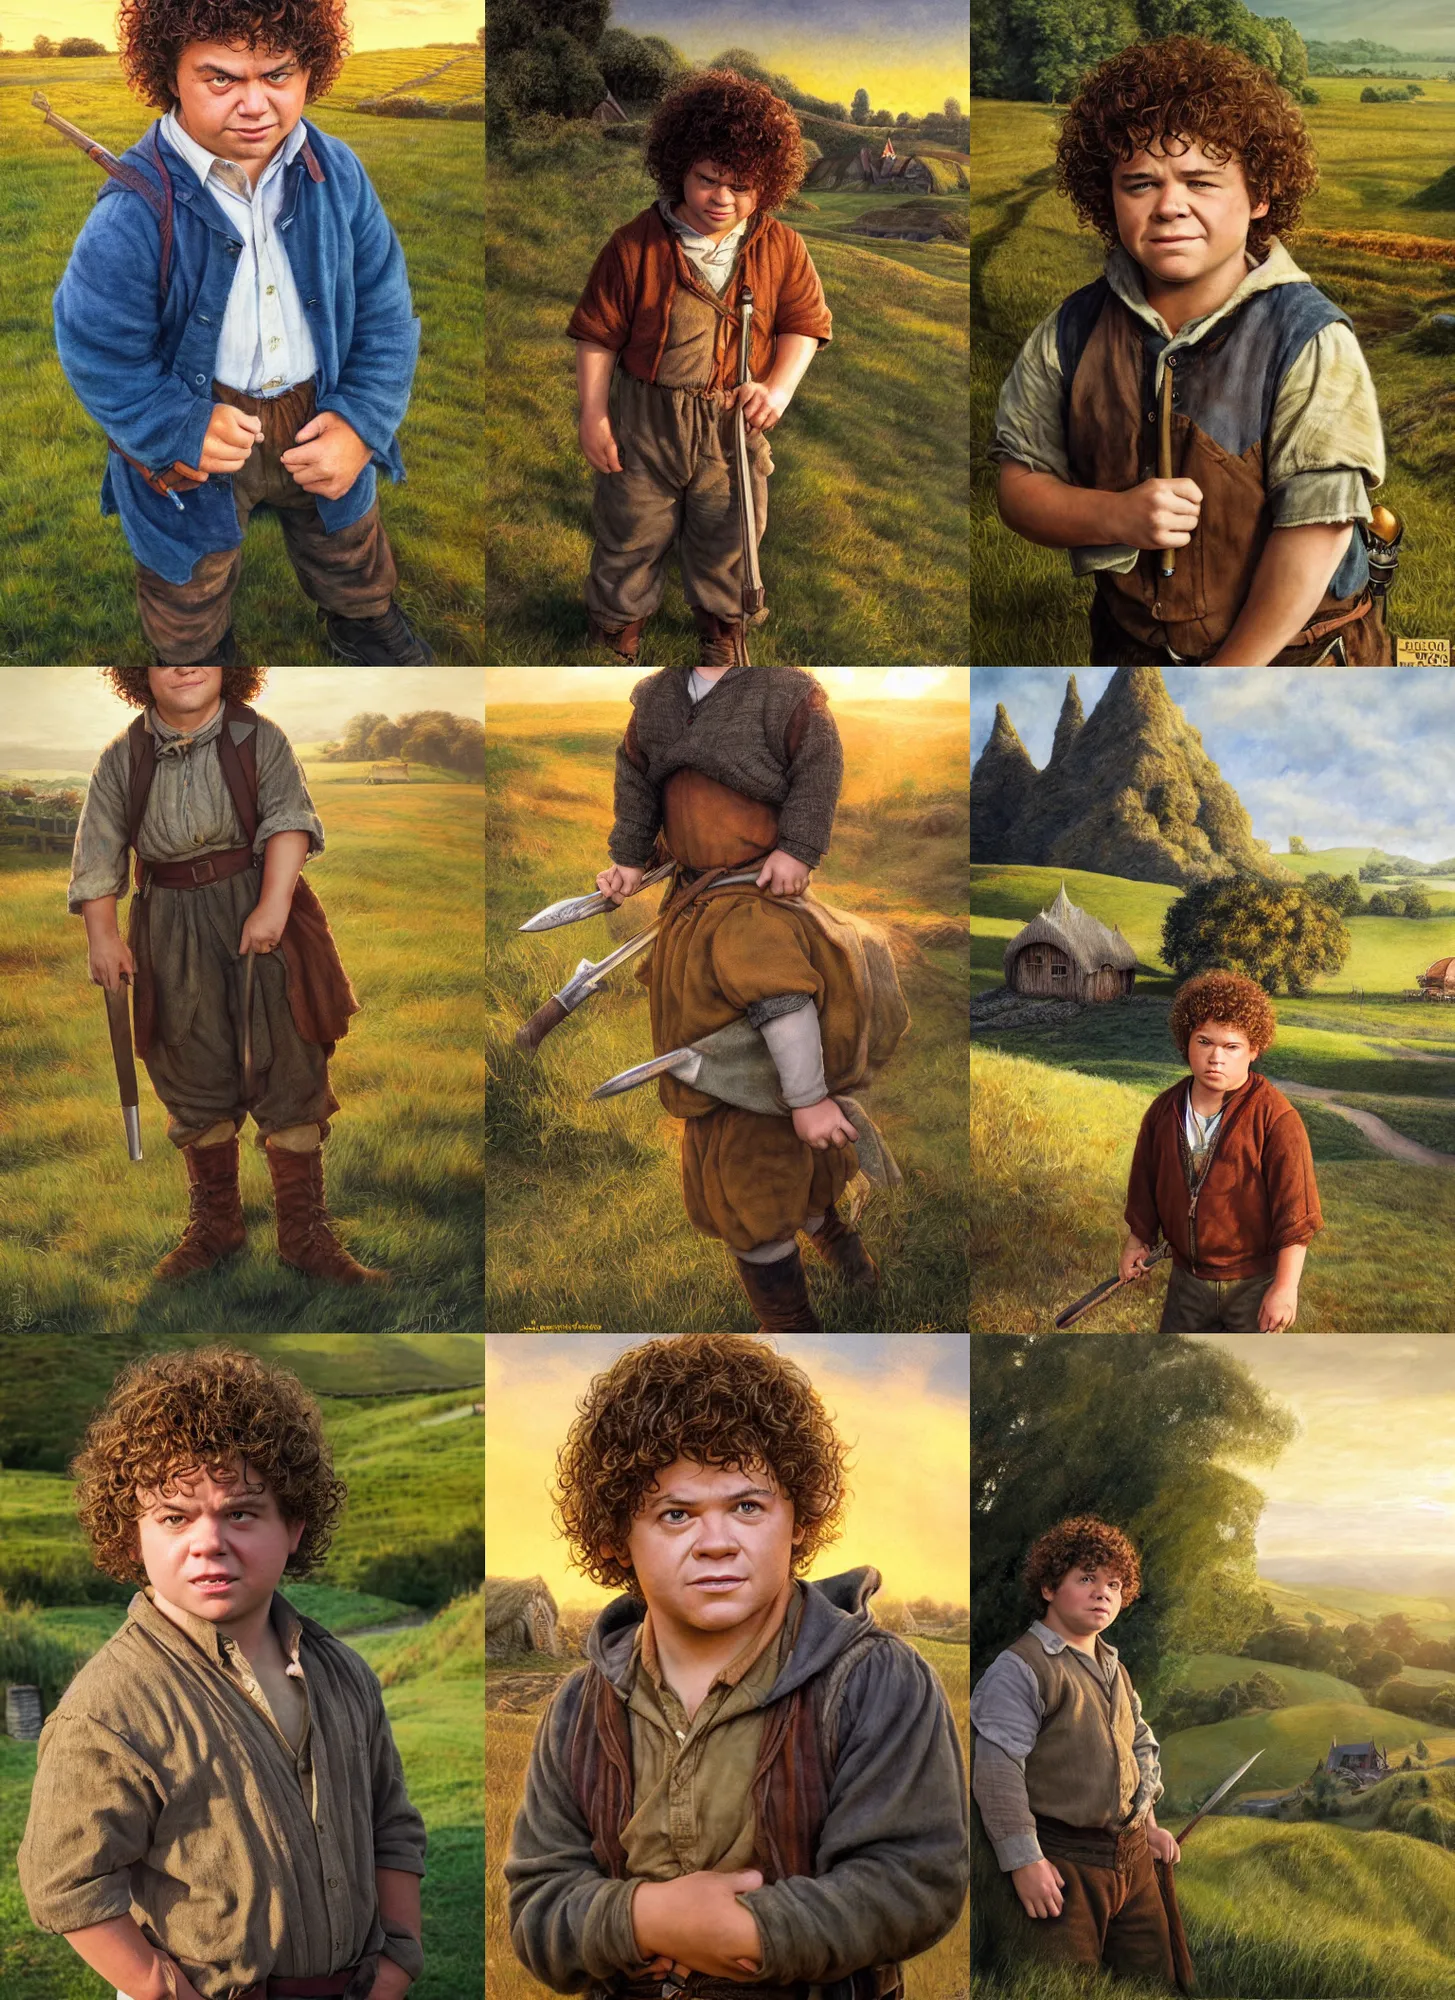 Prompt: gaten matarazzo as samwise gamgee by alan lee, golden hour, hobbiton farm in background, concept art, detailed clothing, art station, oil painting